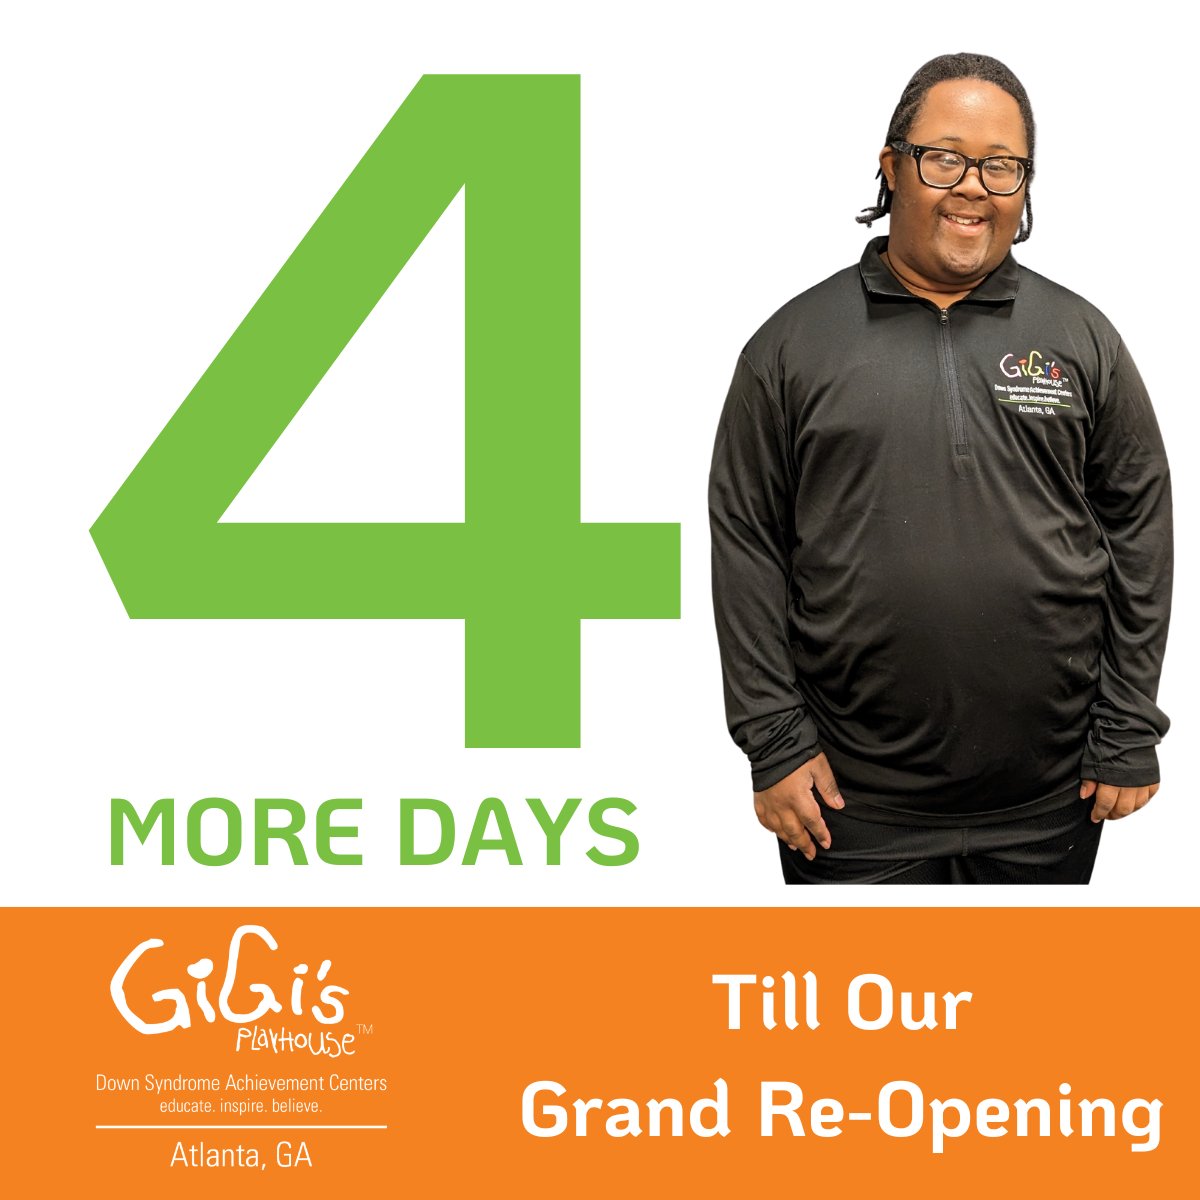 Can you stand the wait?! 💖 4 DAYS LEFT! 💖
Join us for games, a tie-dye station, temporary tattoos, TONS of giveaways, and THE GiGi!!
See you all on Sunday from 2-5pm. Drop by anytime!!
#gigisplayhouse
#grandreopening